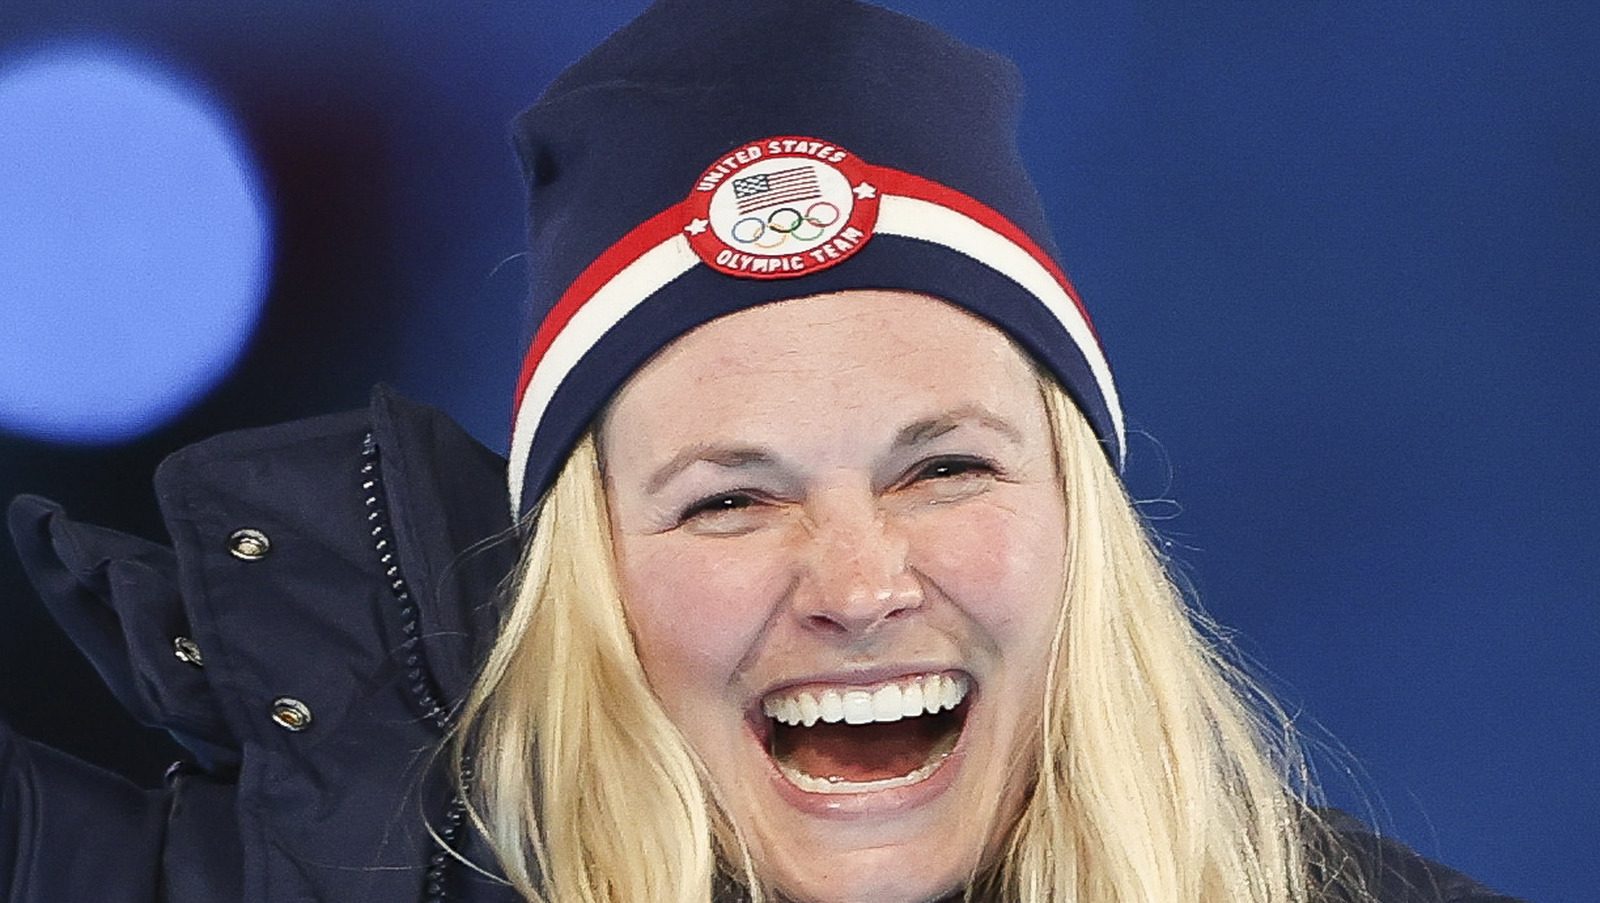 Olympian Jessie Diggins Shares Her Experience And Recovery With An